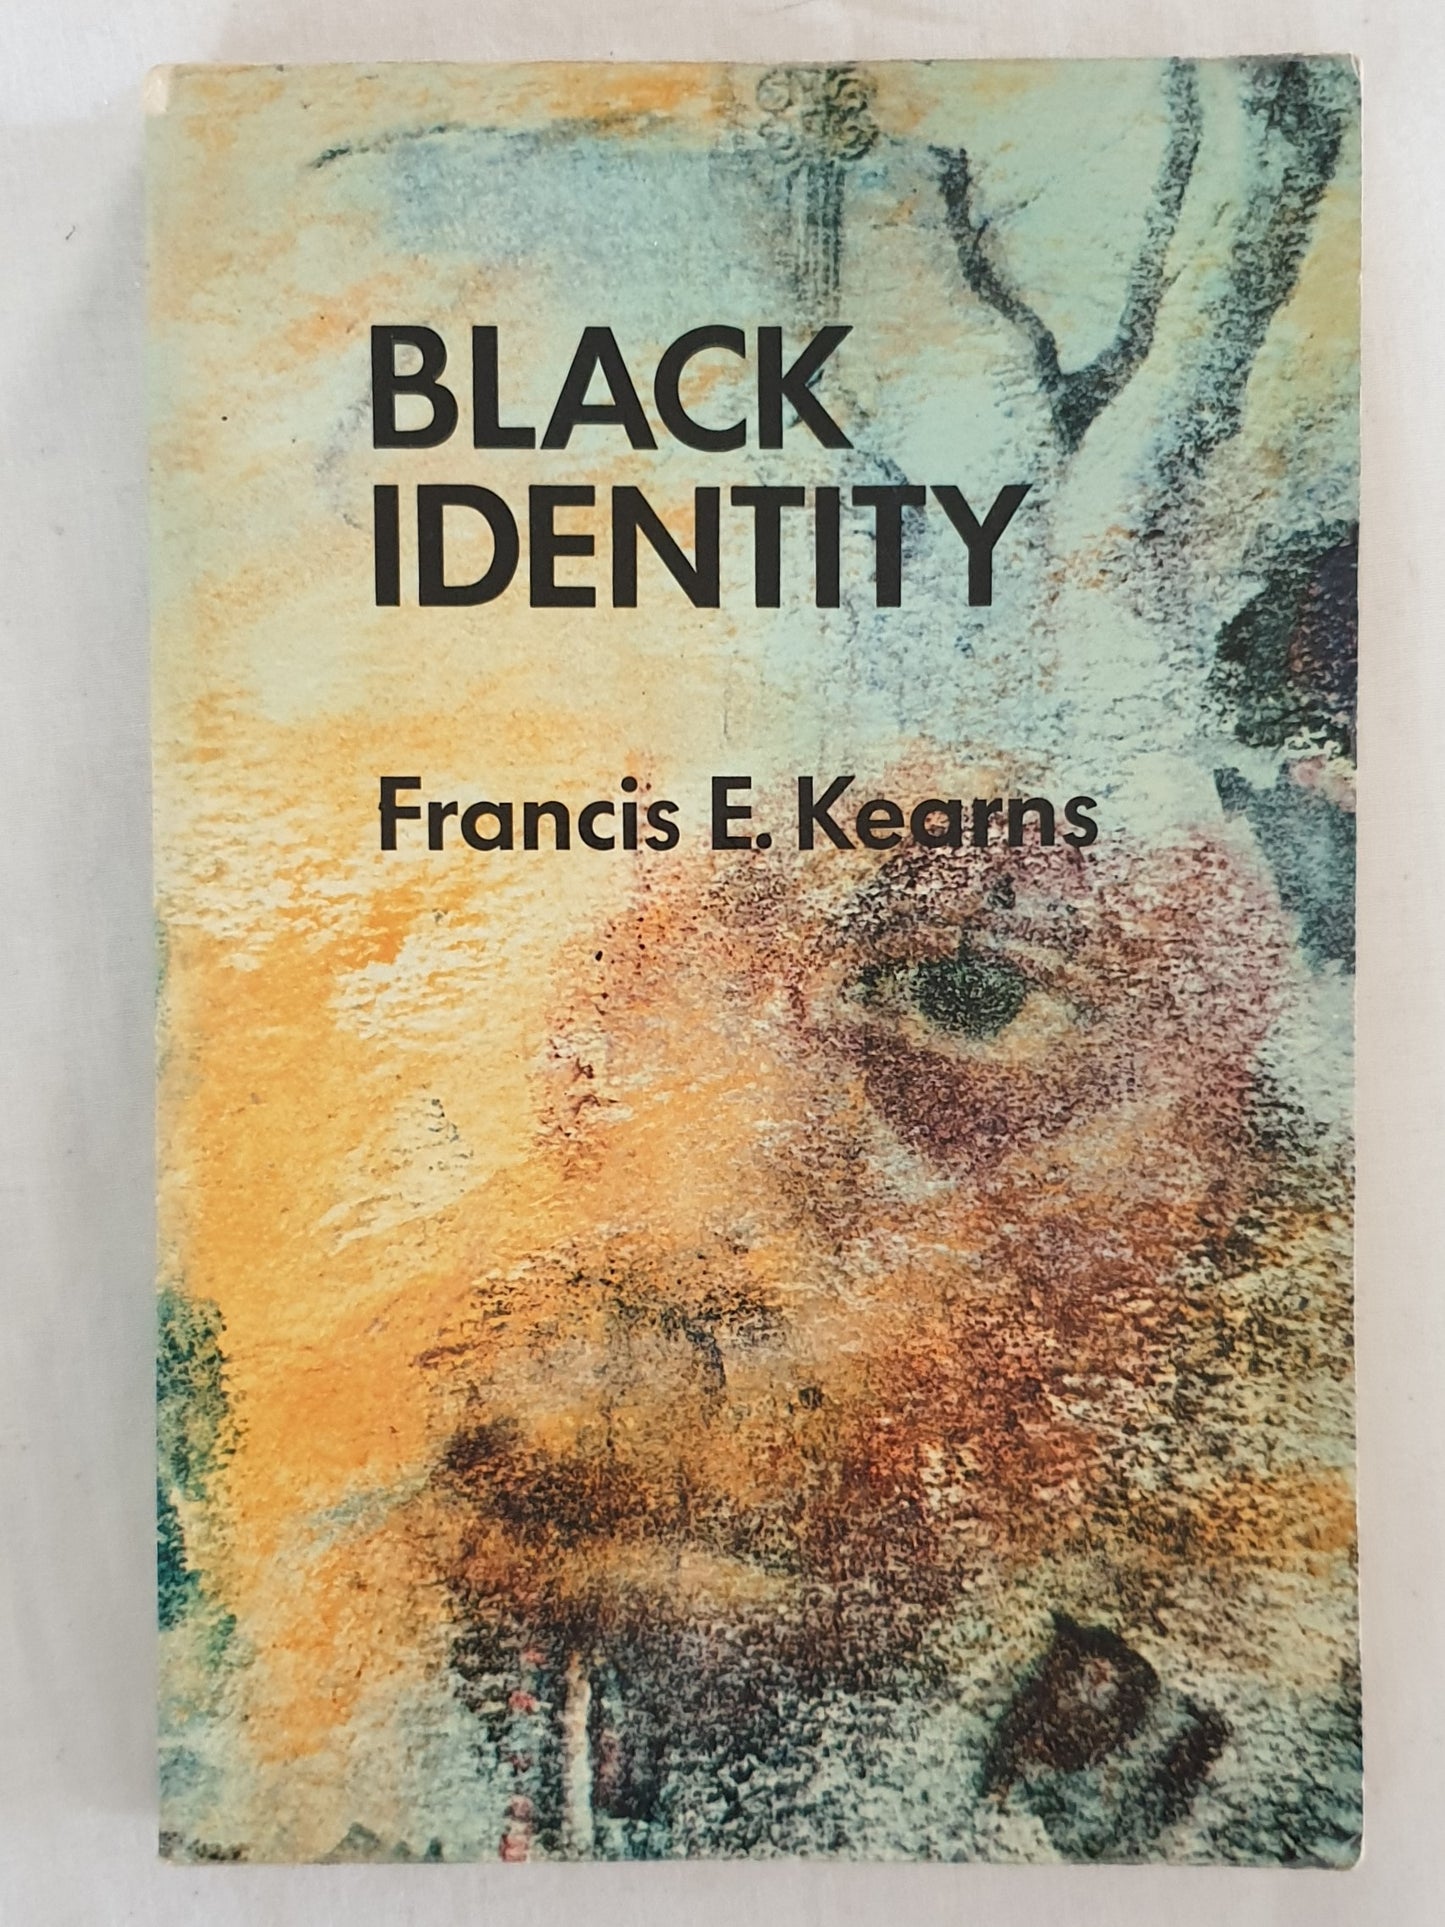 Black Identity  A Thematic Reader  by Francis E. Kearns